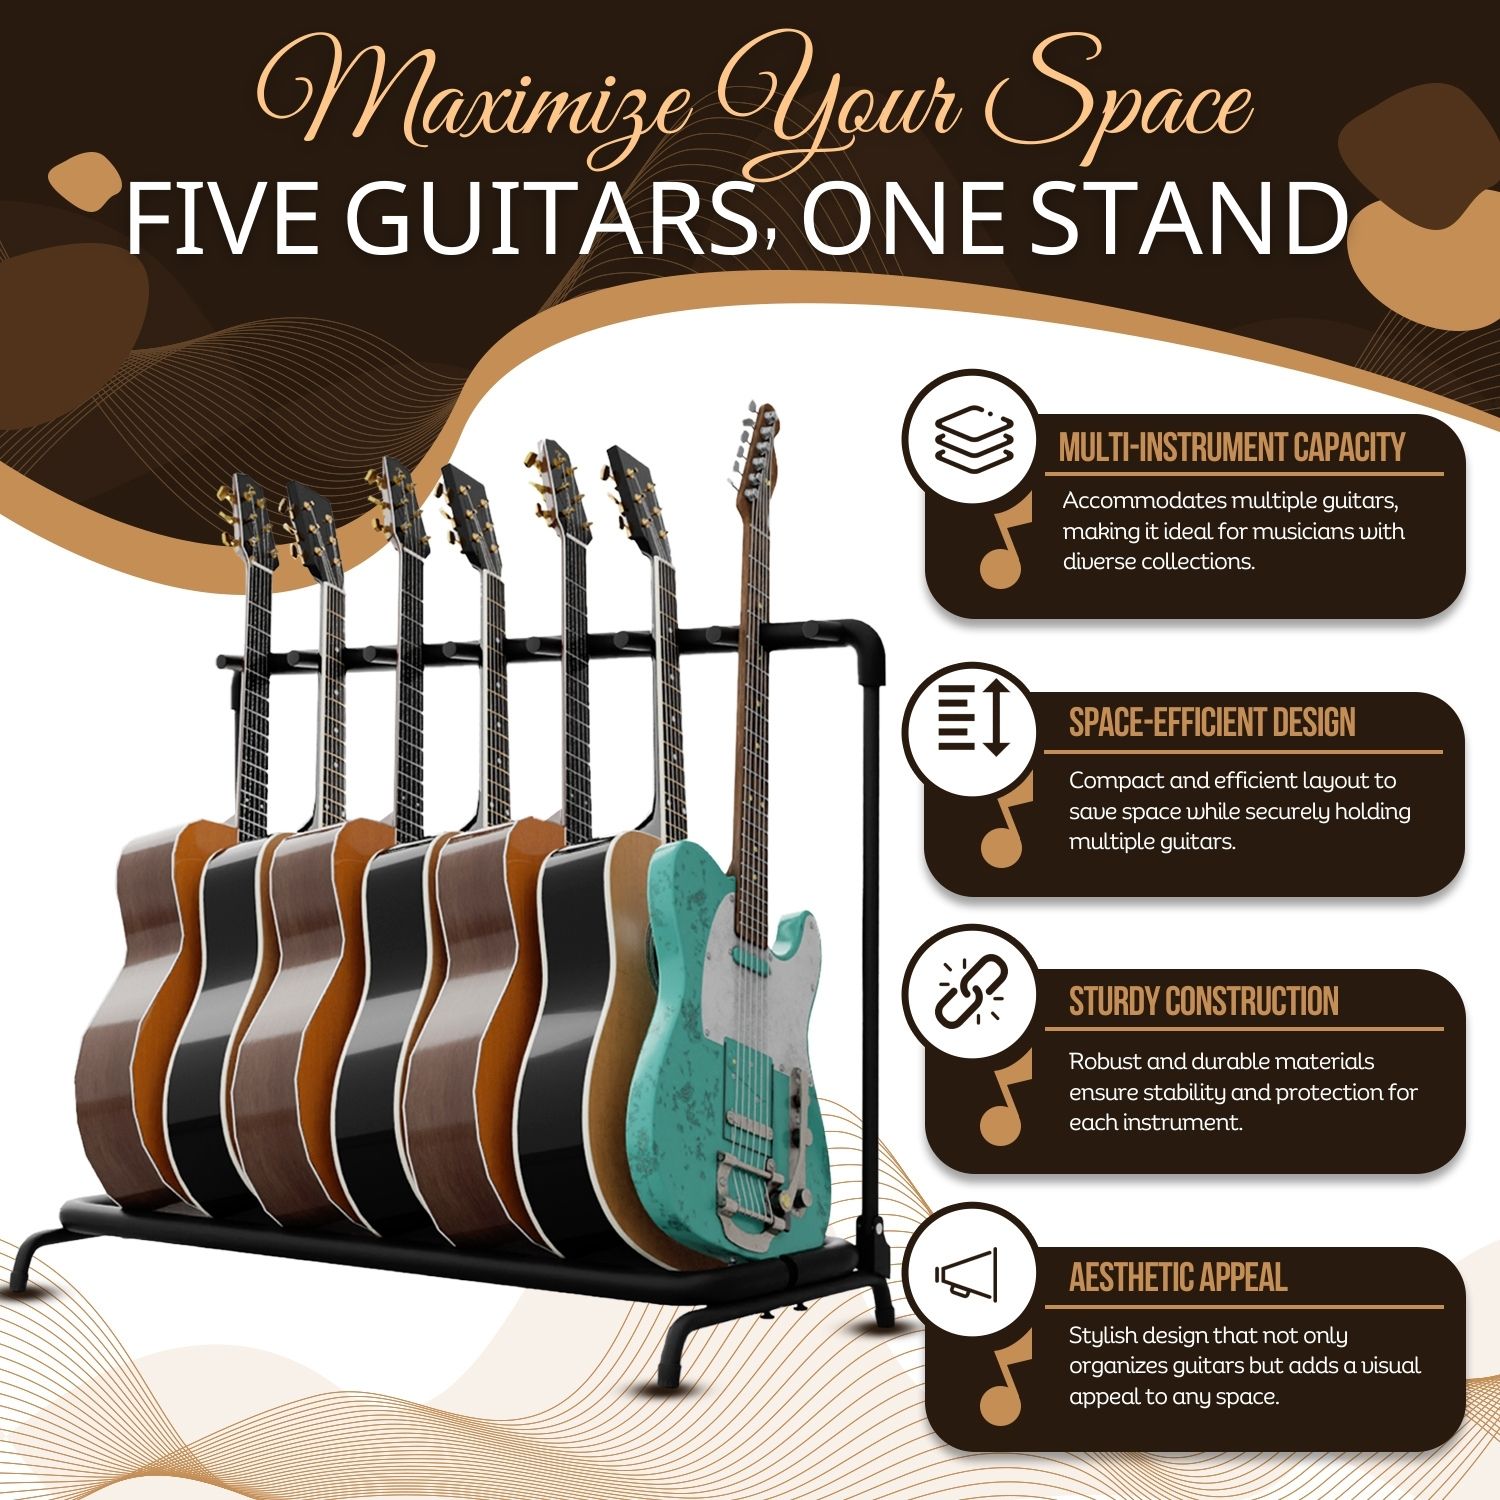 Store Multiple Instruments - Premium quality metal construction provides reliable and strong support that can hold up to 7 guitars; Compatible to store your electric, acoustic and classical guitars as well as your basses, best for any string musician